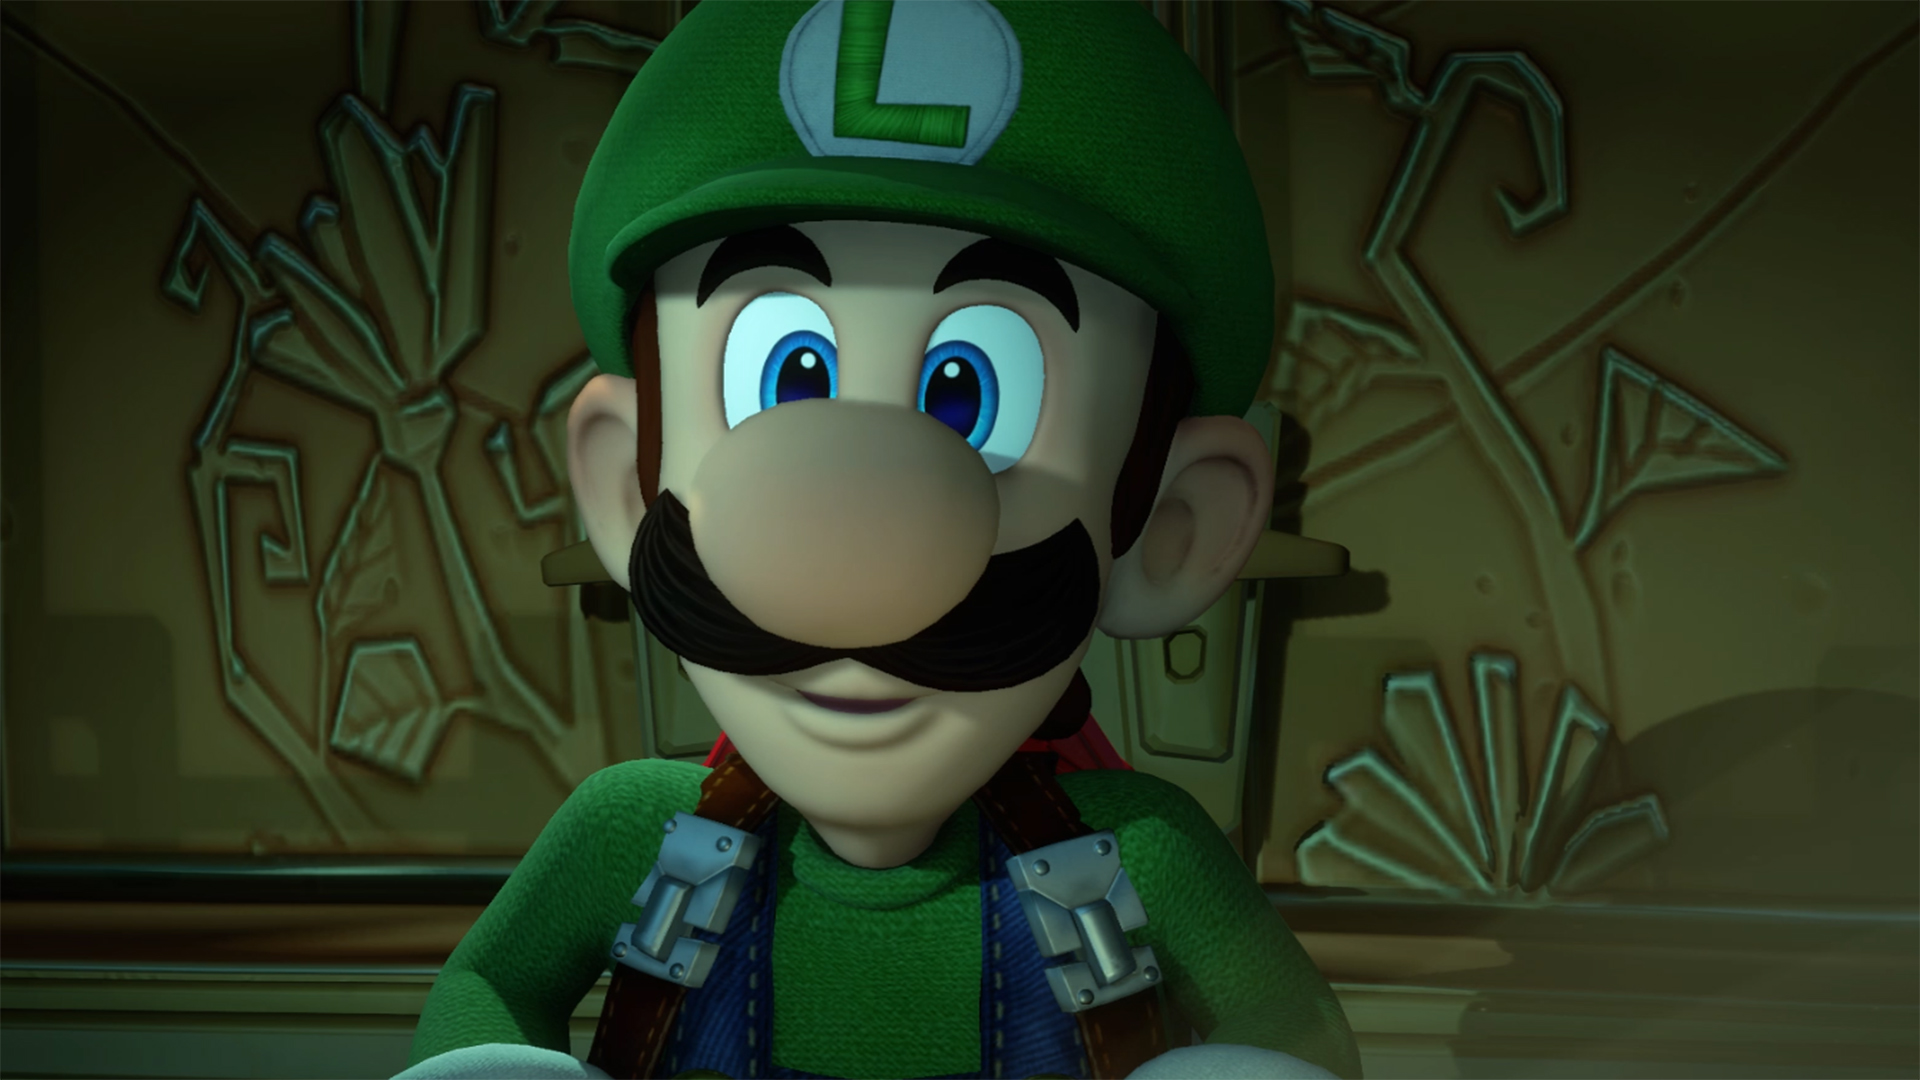 Charlie Day wants to star in a Luigi's Mansion movie